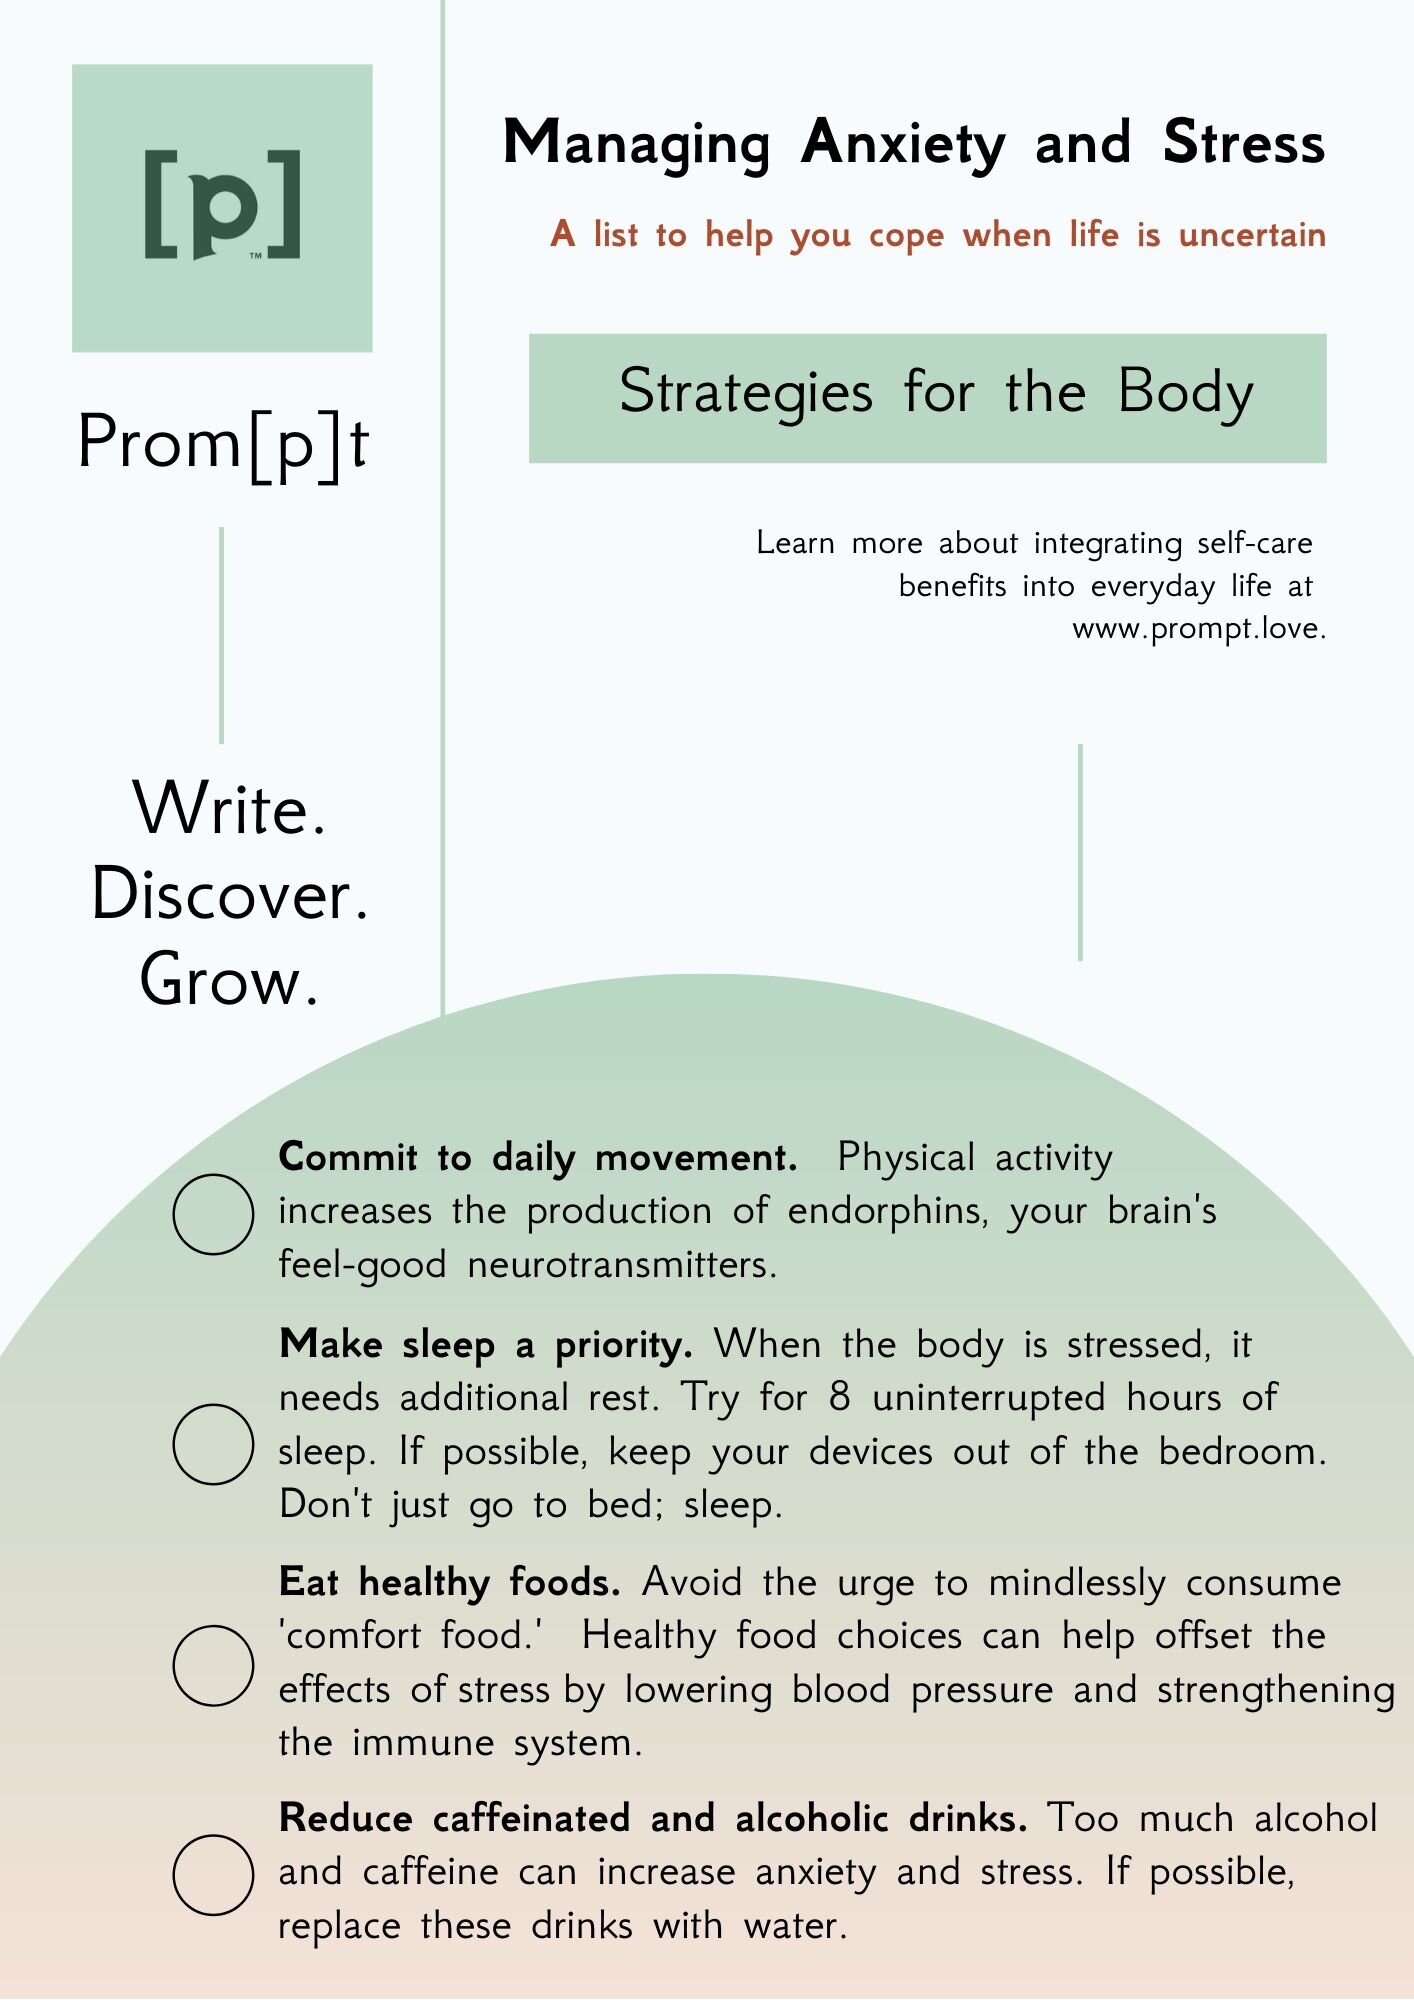 Strategies for In the Body